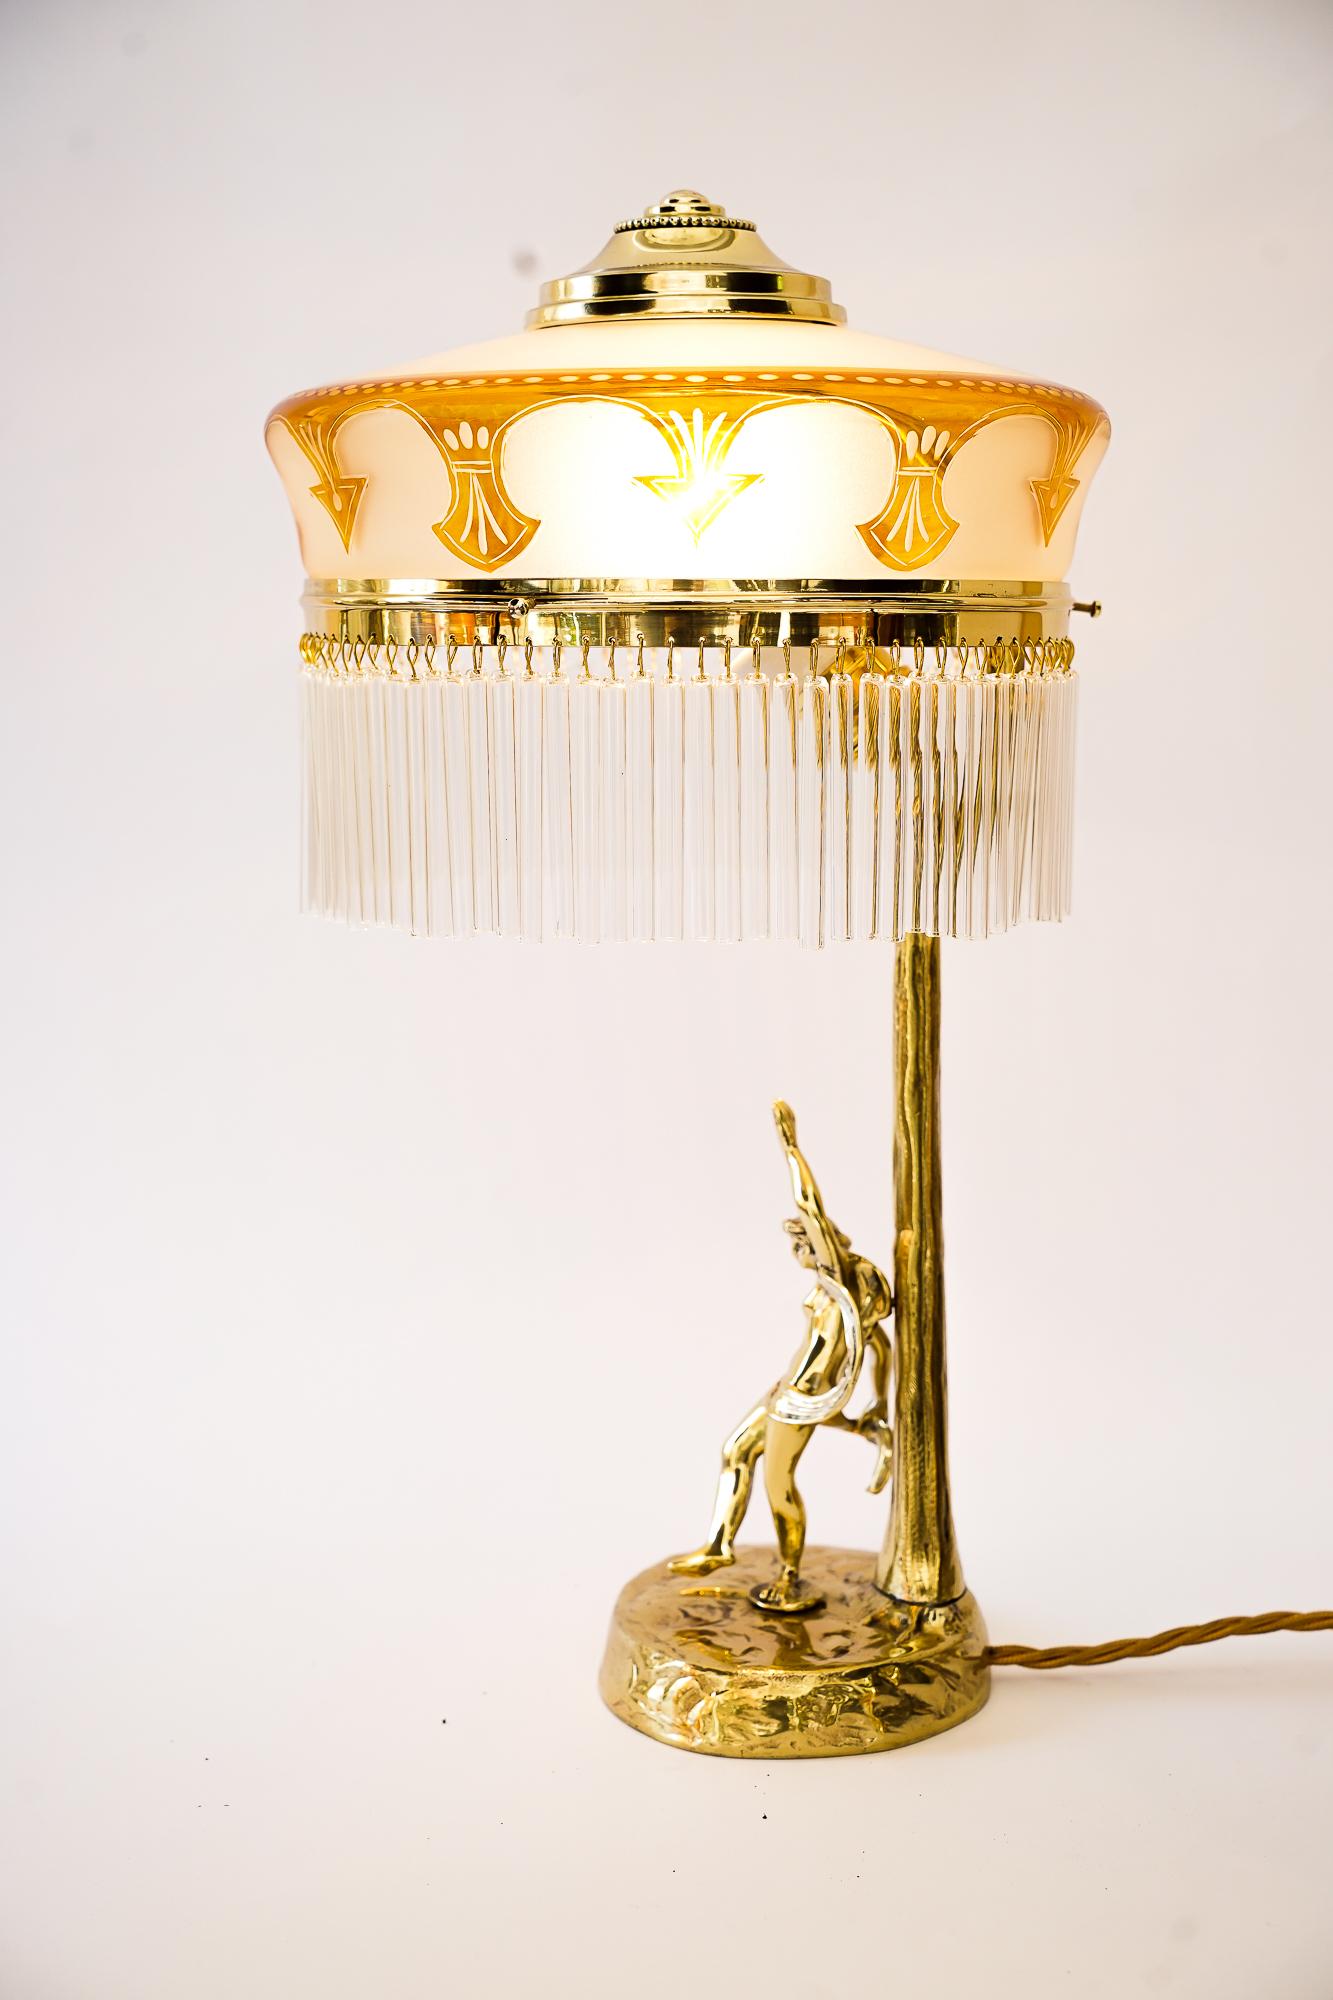 Jugendstil Table Lamp with Original Antique Glass Shade, Vienna, Around 1910s For Sale 11